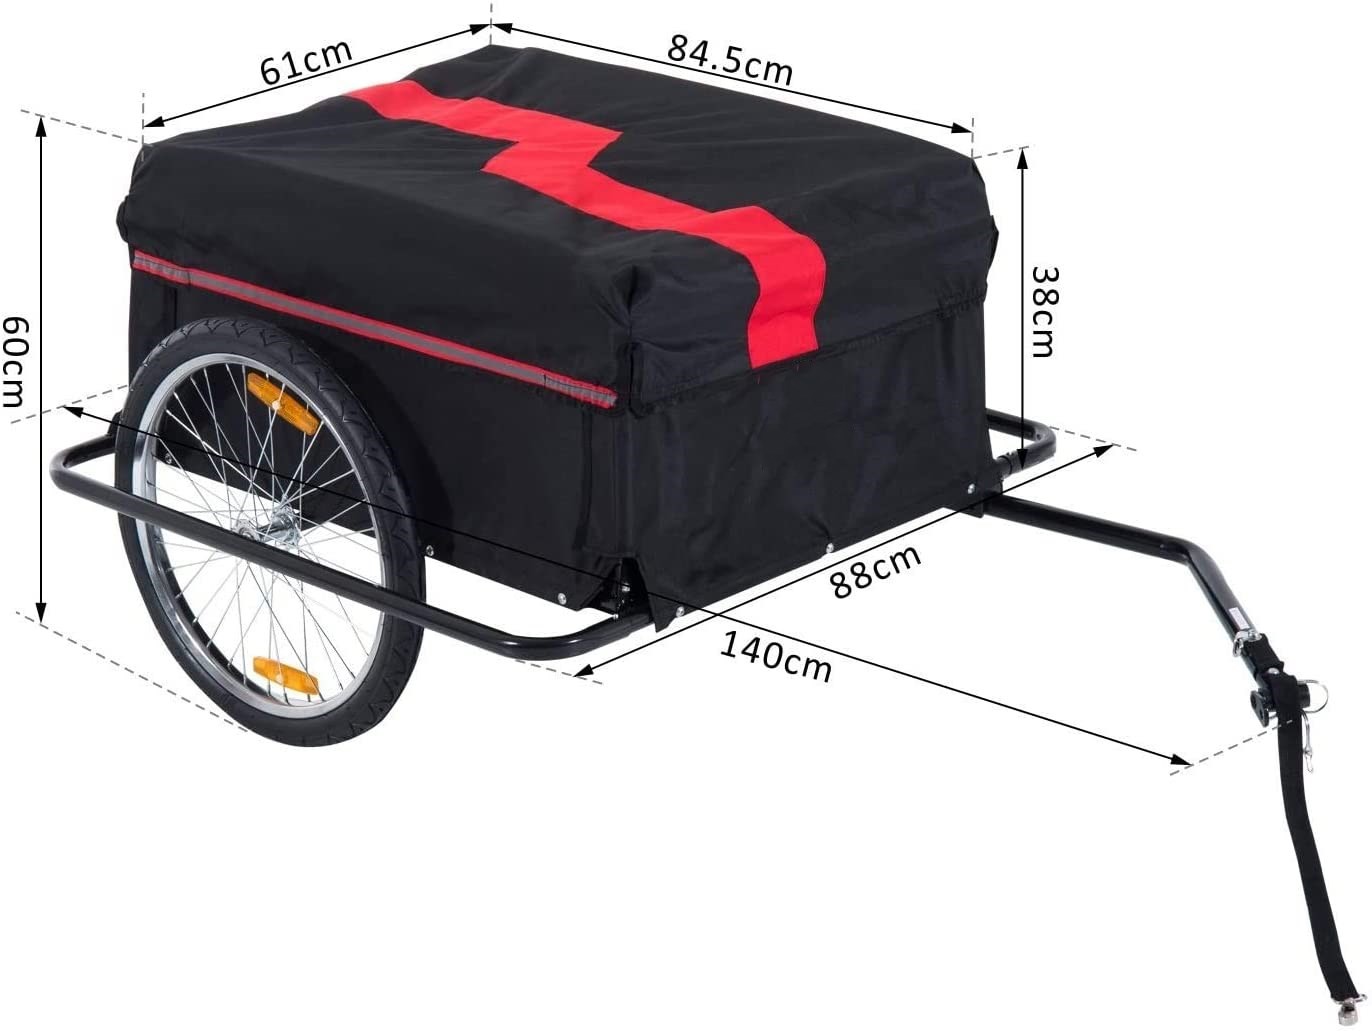 Steel Frame Bicycle Storage Carrier Trailer with Removable Cover and Hitch (Red and Black)